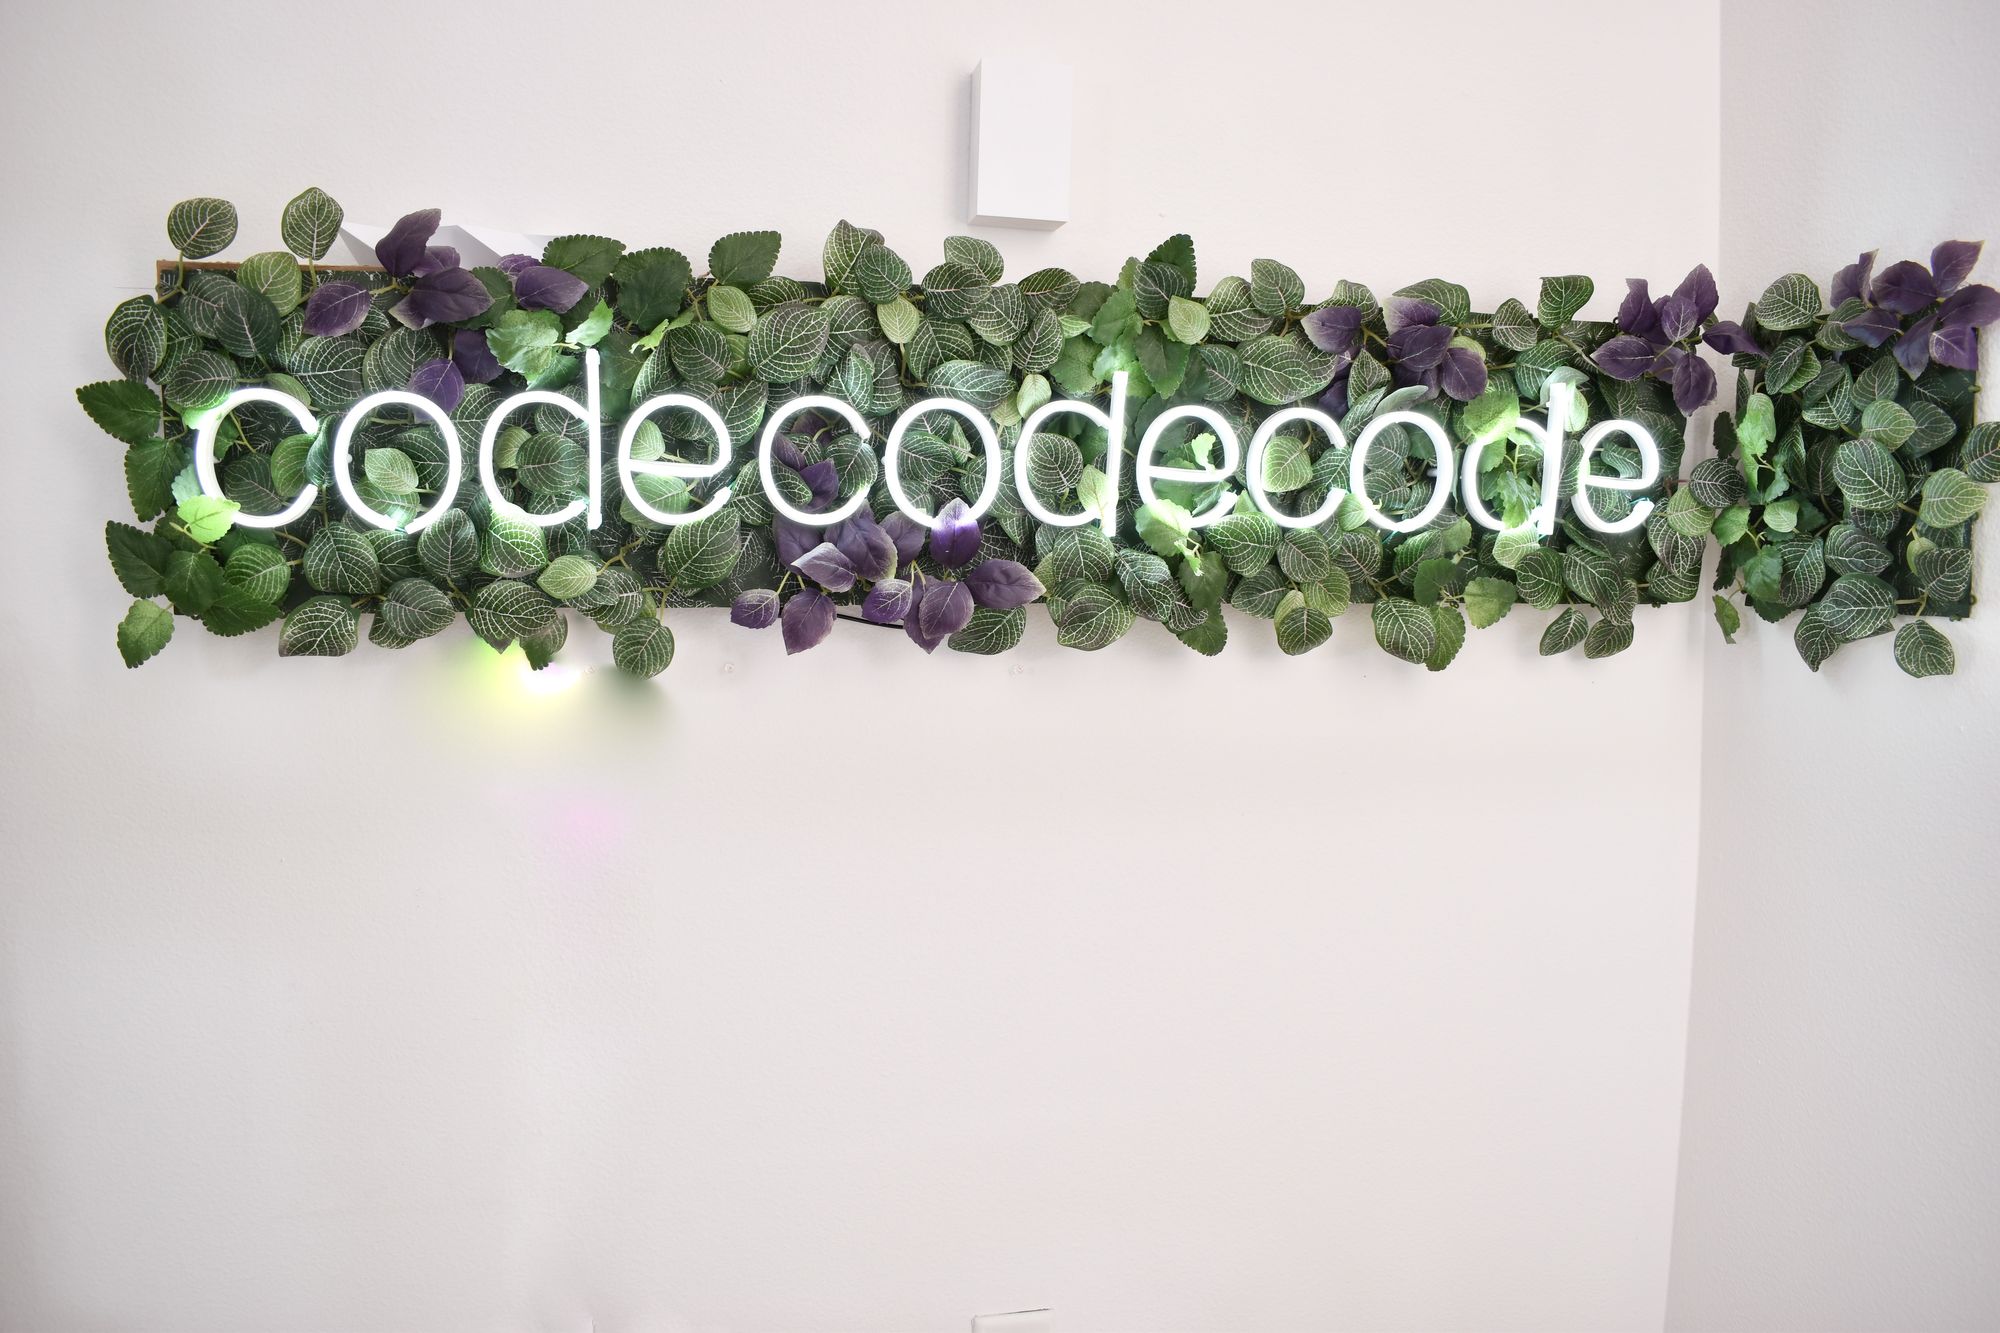 Making a video call background: codecodecode!